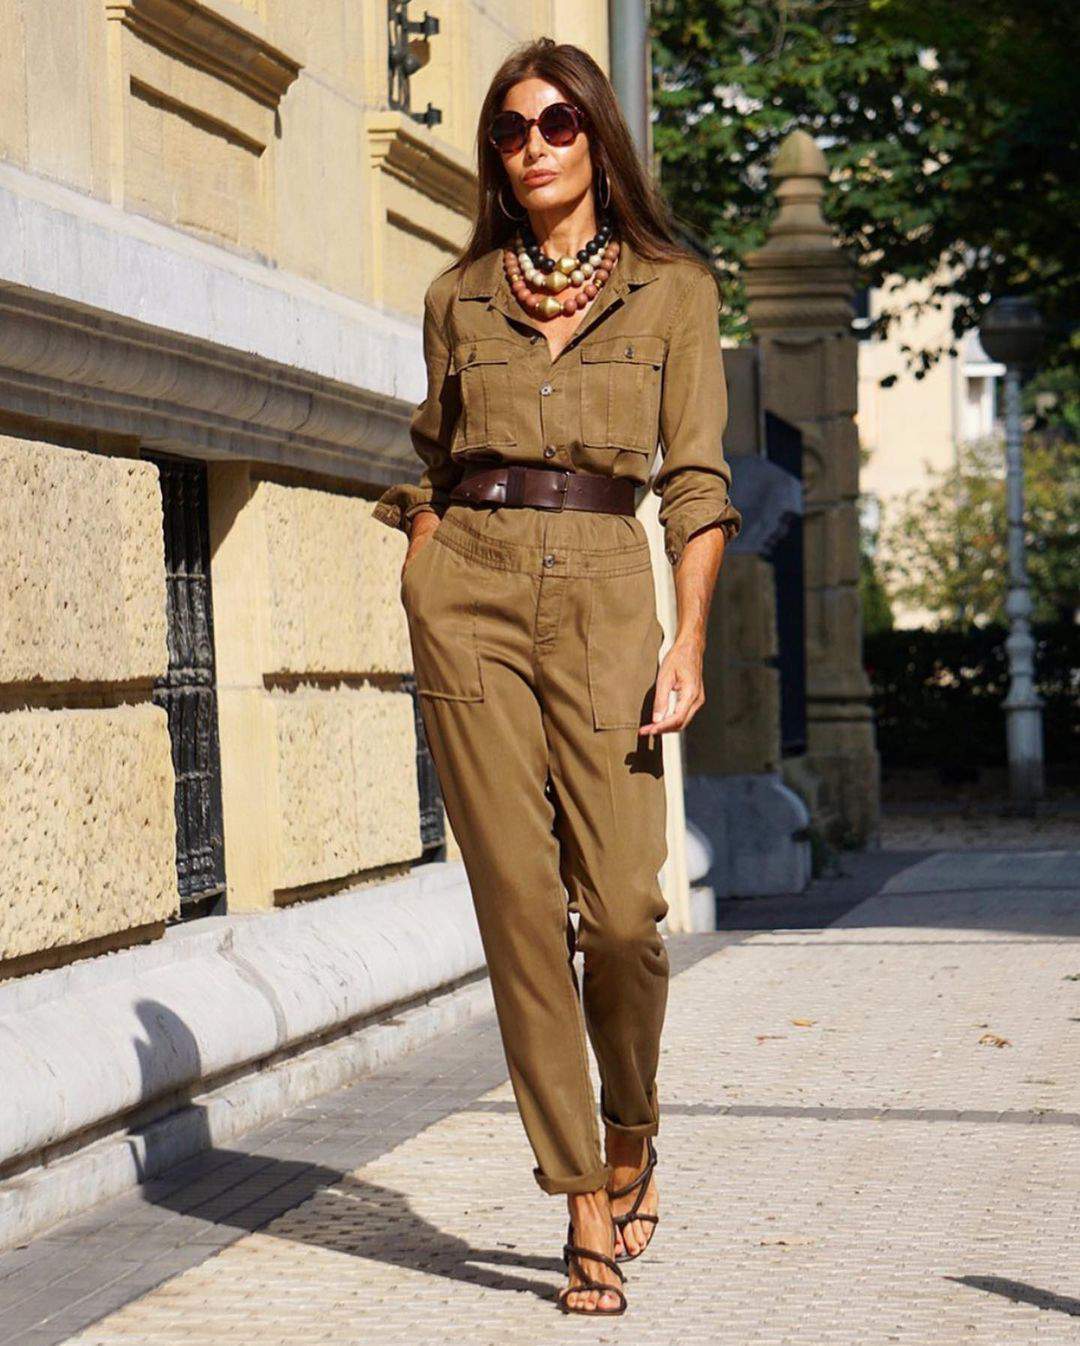 50 Trendy Outfit Ideas To Look More Stylish In 2021 images 17